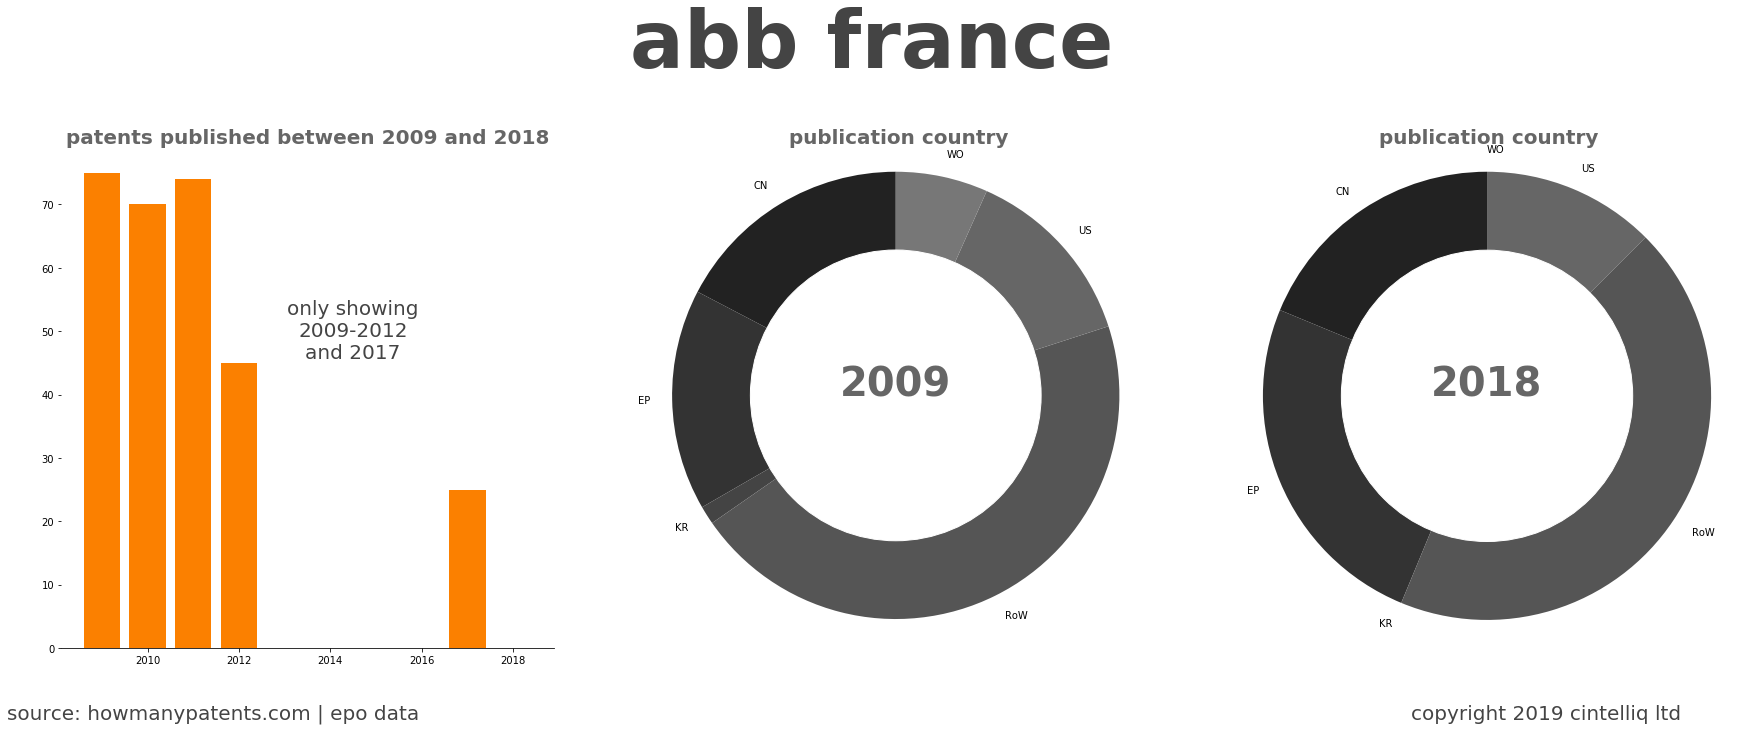 summary of patents for Abb France